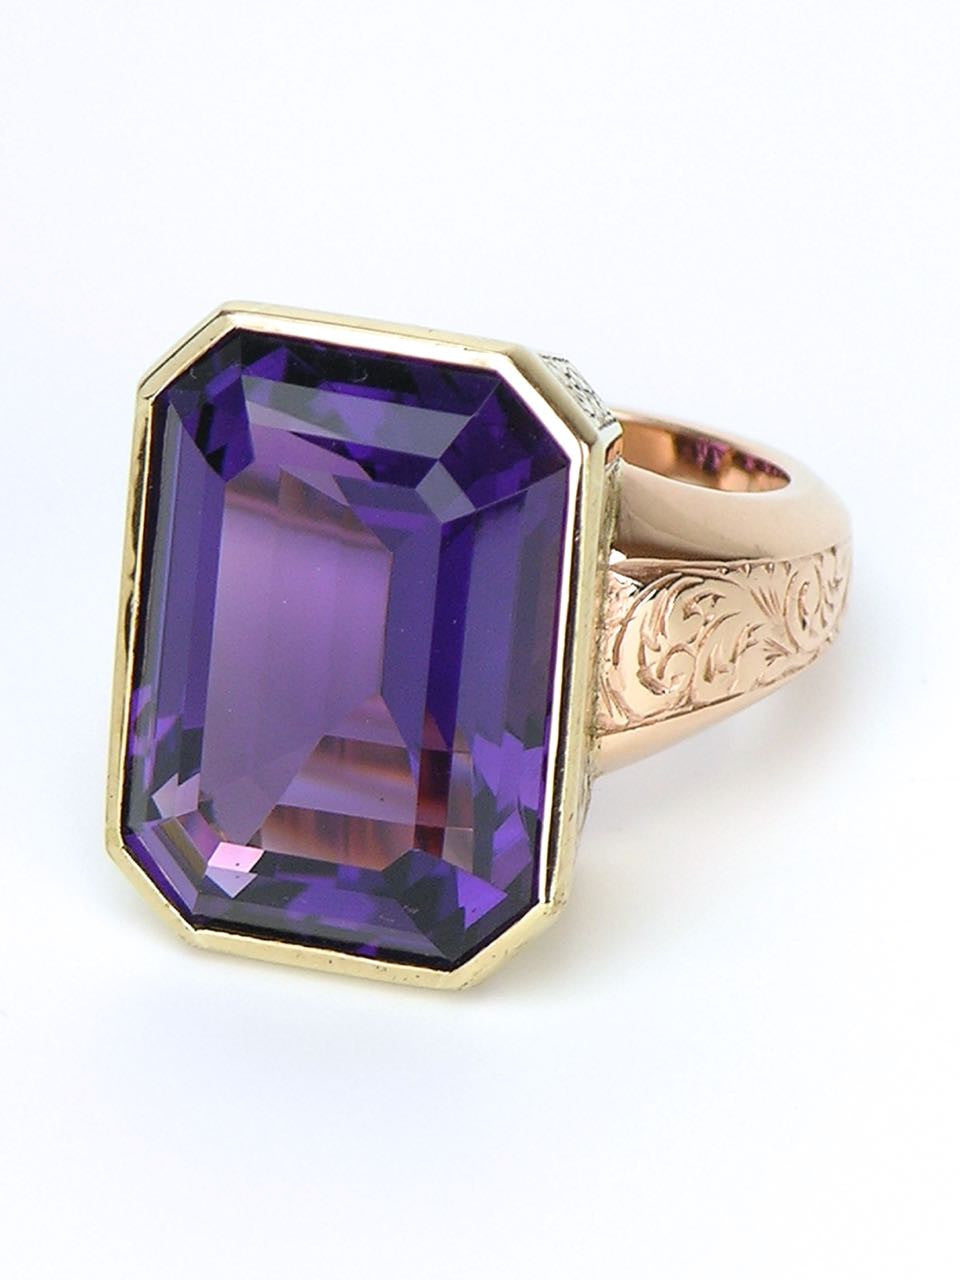 Vintage Amethyst and Gold Cocktail Ring - Love and Hatred